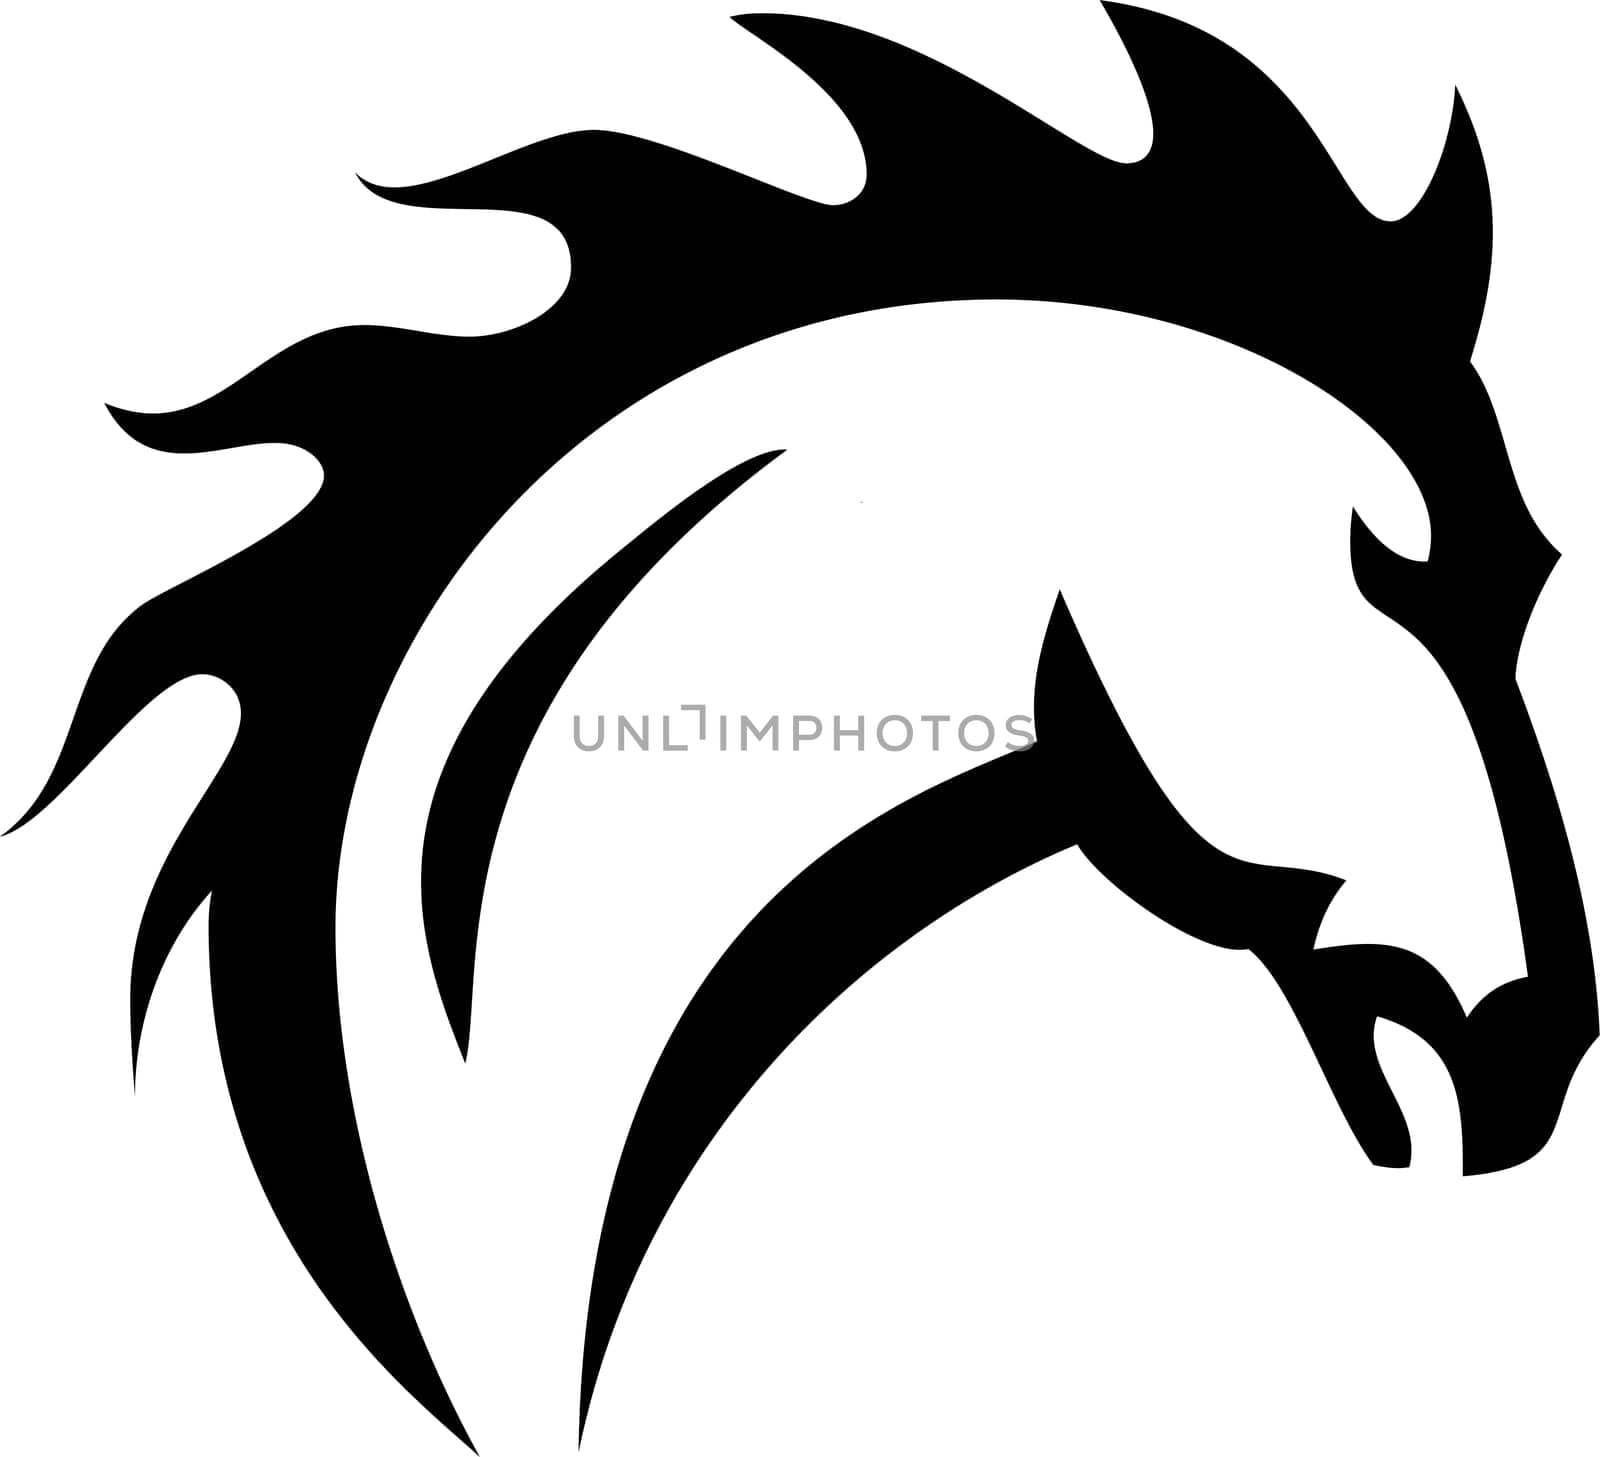 Tribal tattoo style illustration of a head of a horse or stallion with fiery mane on fire viewed from side on isolated white background done in black and white.